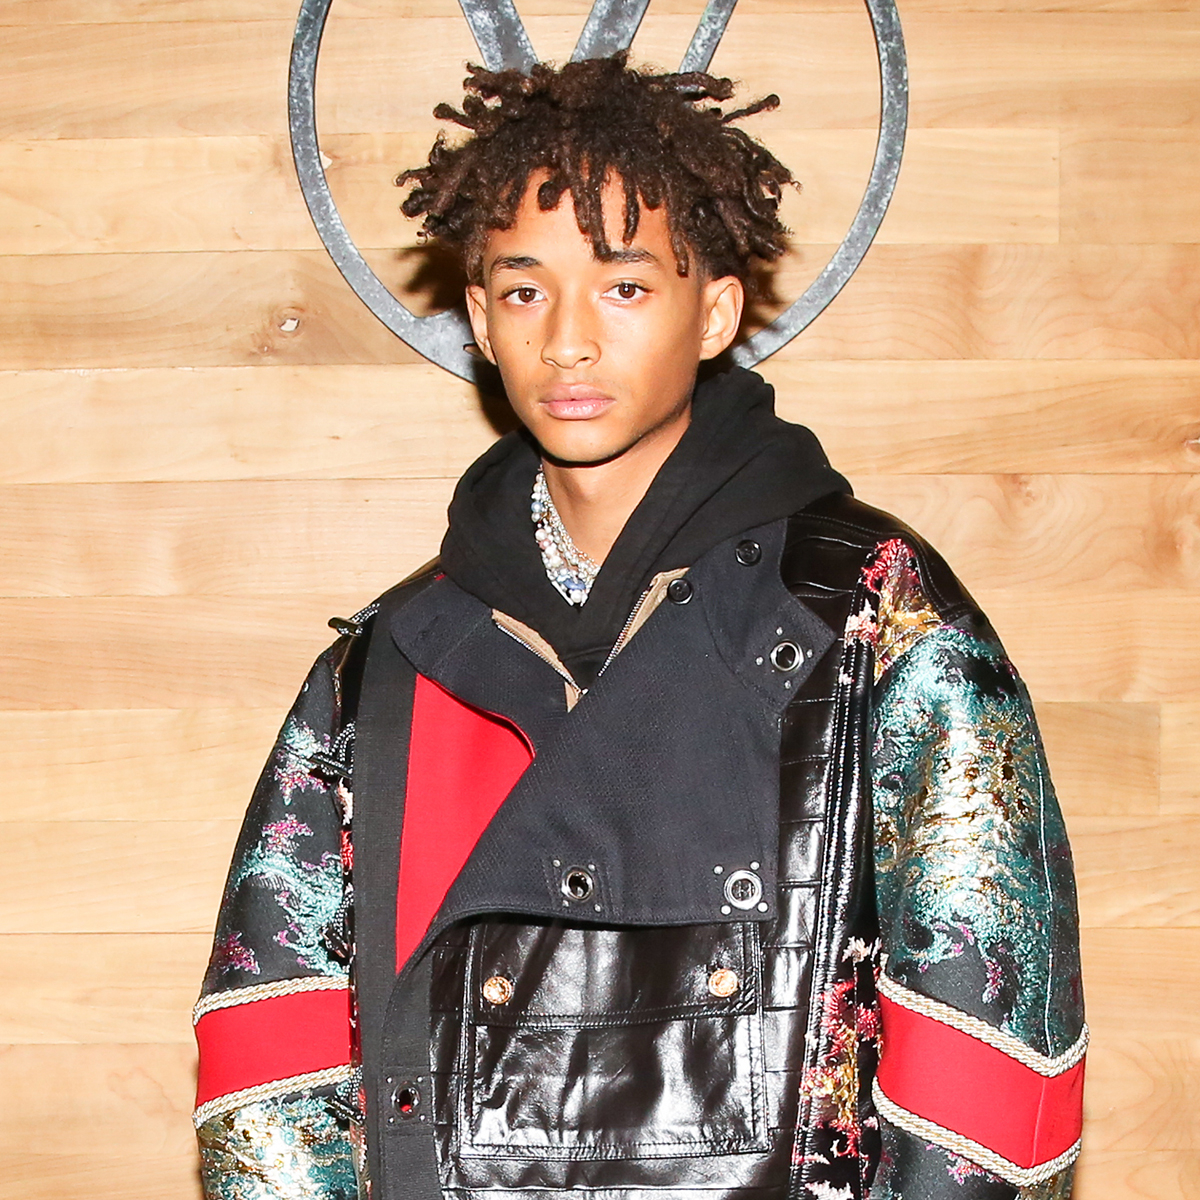 Jaden Smith Is Gender-Fluid for This New Shirtless Photo: Photo 3560885, Jaden  Smith, Magazine, Shirtless, Willow Smith Photos